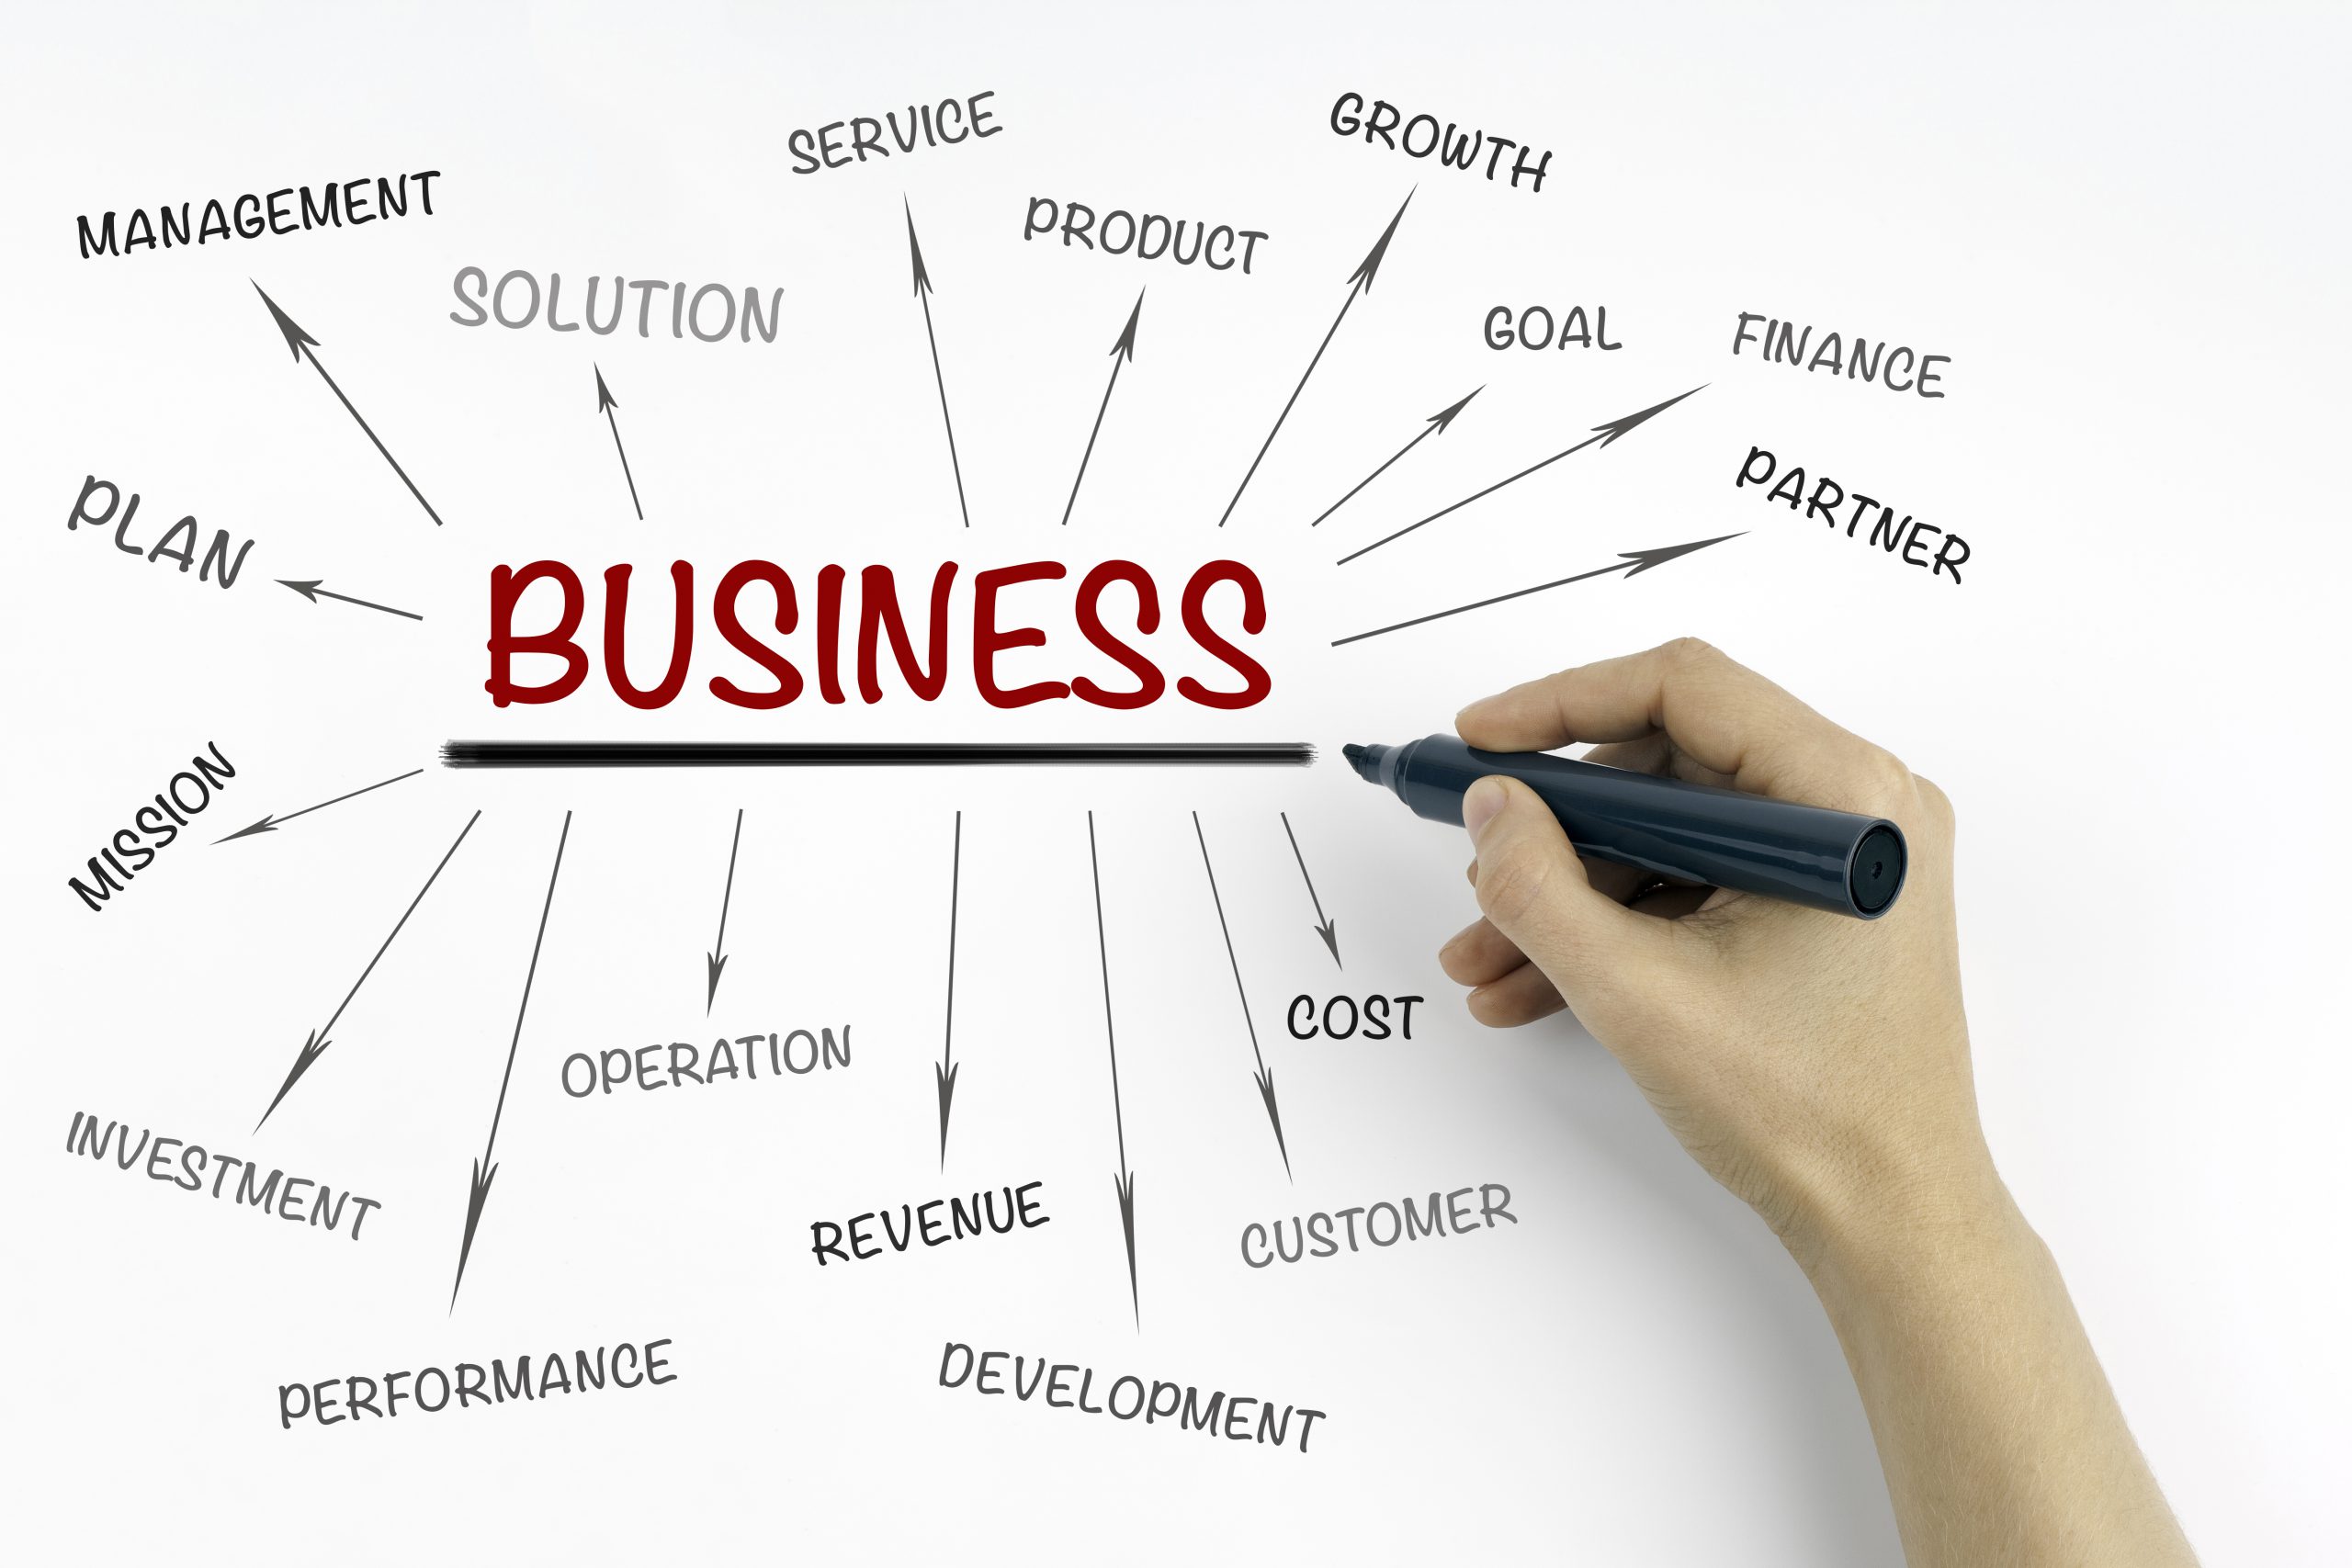 Business is successful due to performance management initiatives and tools